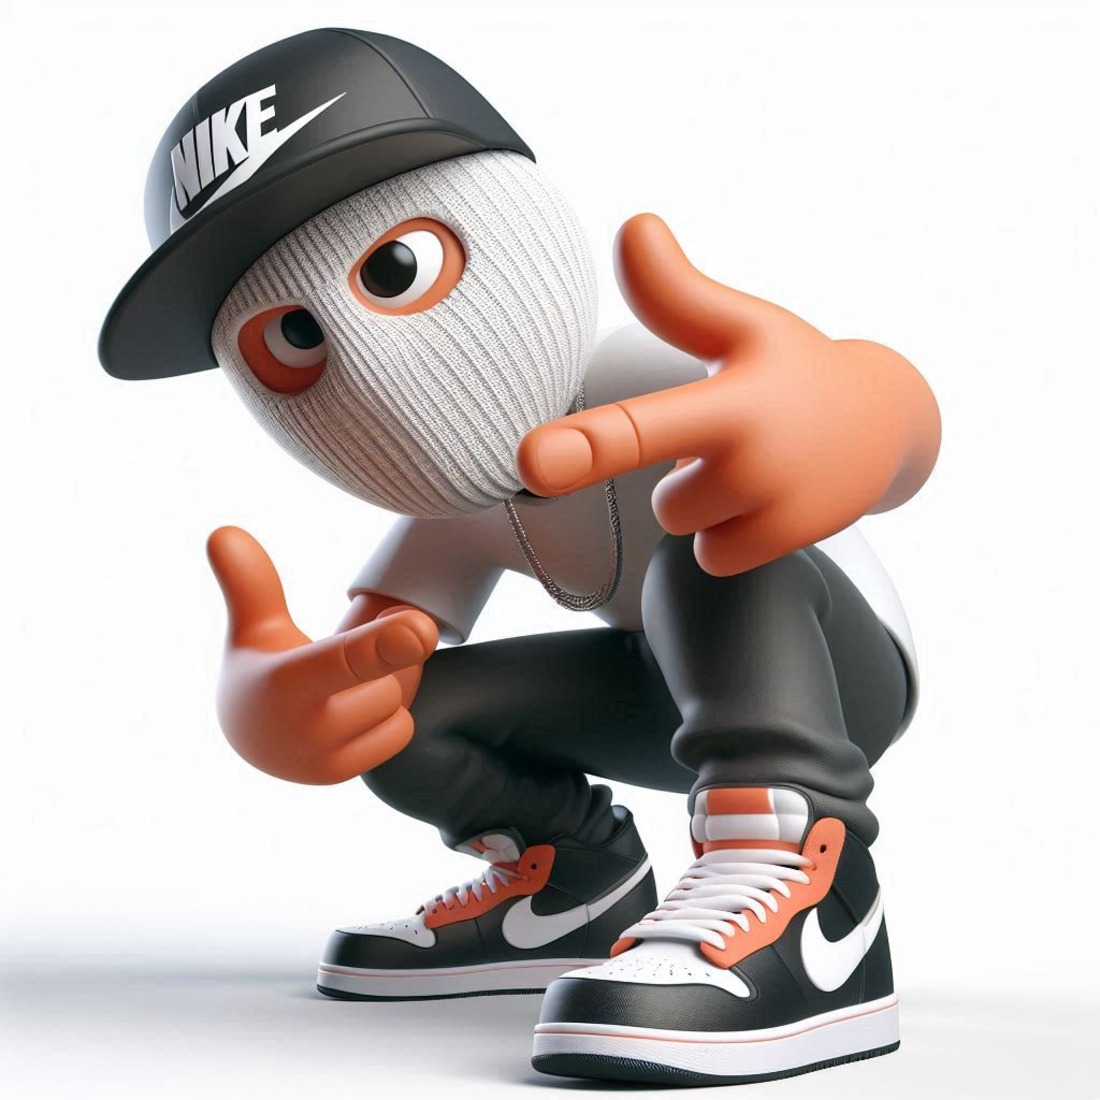 Nike Urban Street Wear 3D Gangsta Rap Collectible Characters 2nd Edition cover image.